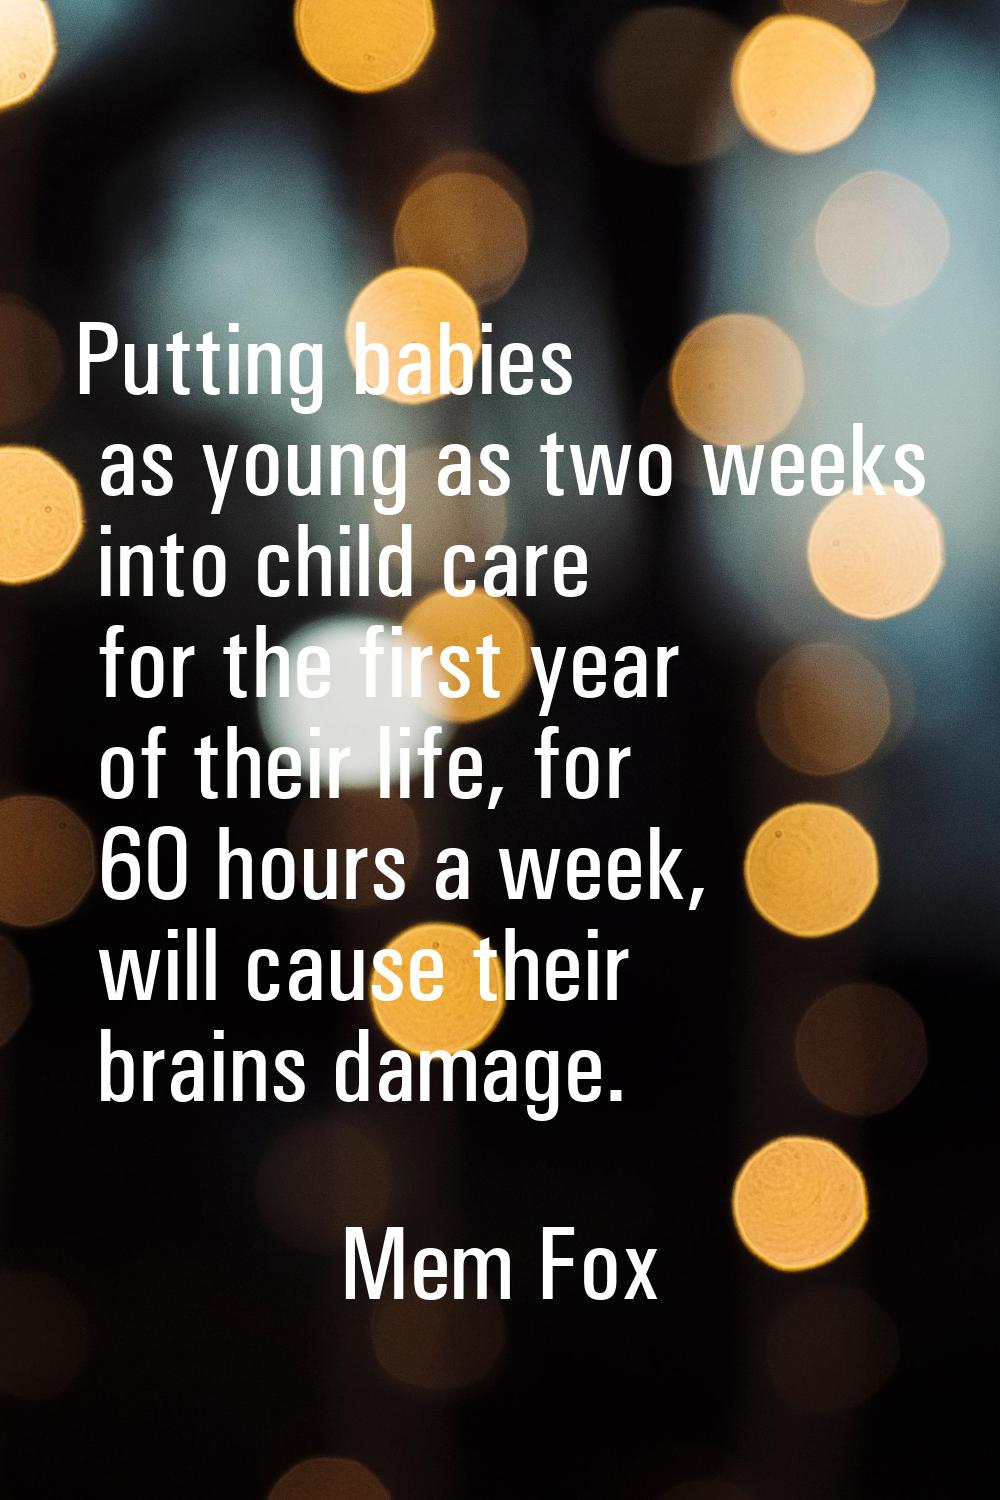 Putting babies as young as two weeks into child care for the first year of their life, for 60 hours